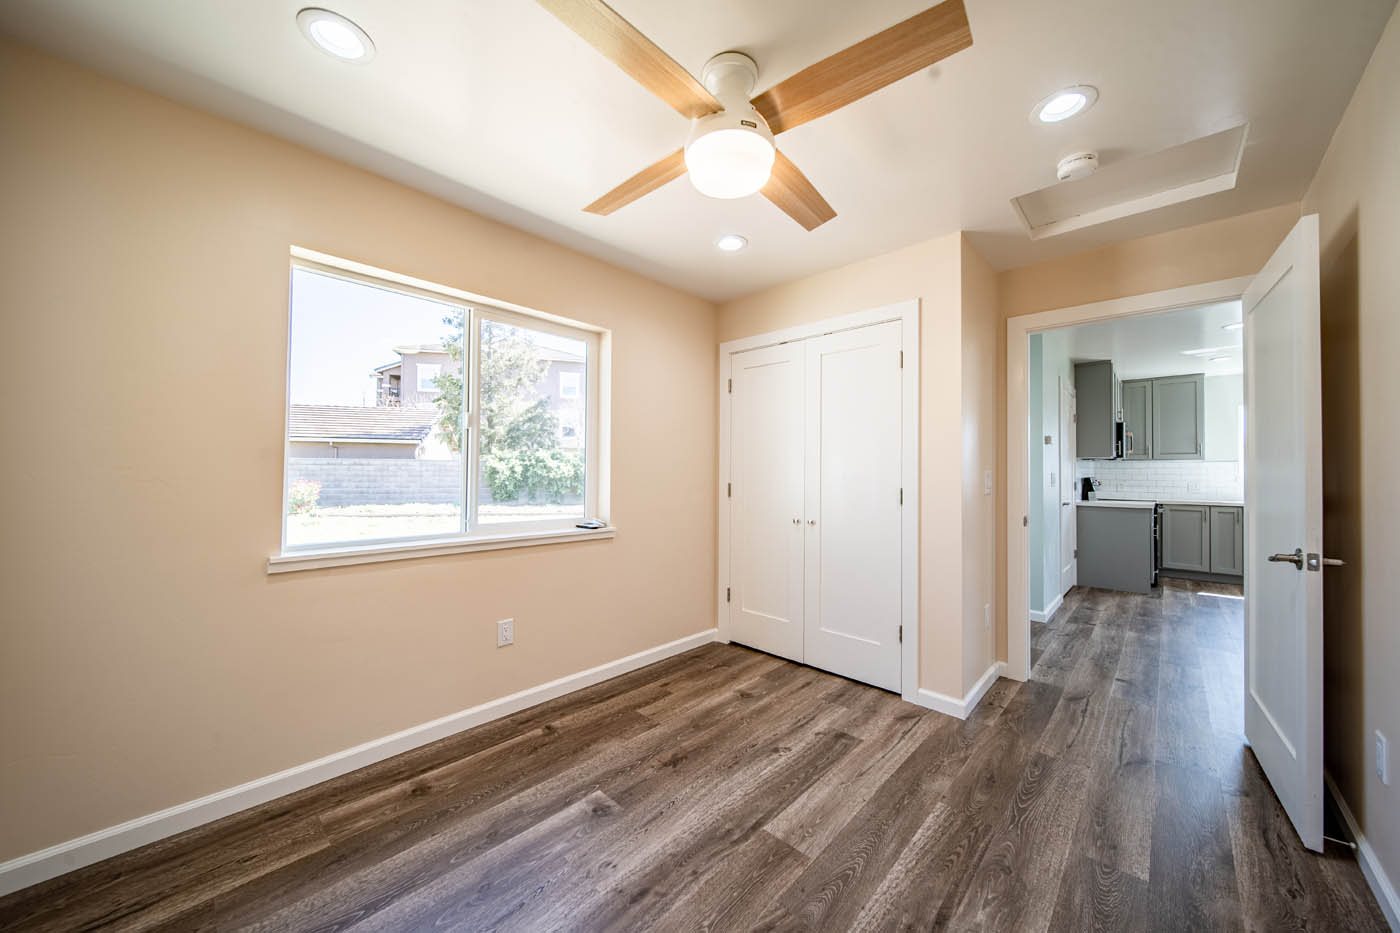 Anchored Tiny Homes East Bay ADU Gallery: 2-Bedroom ADUs. - 23